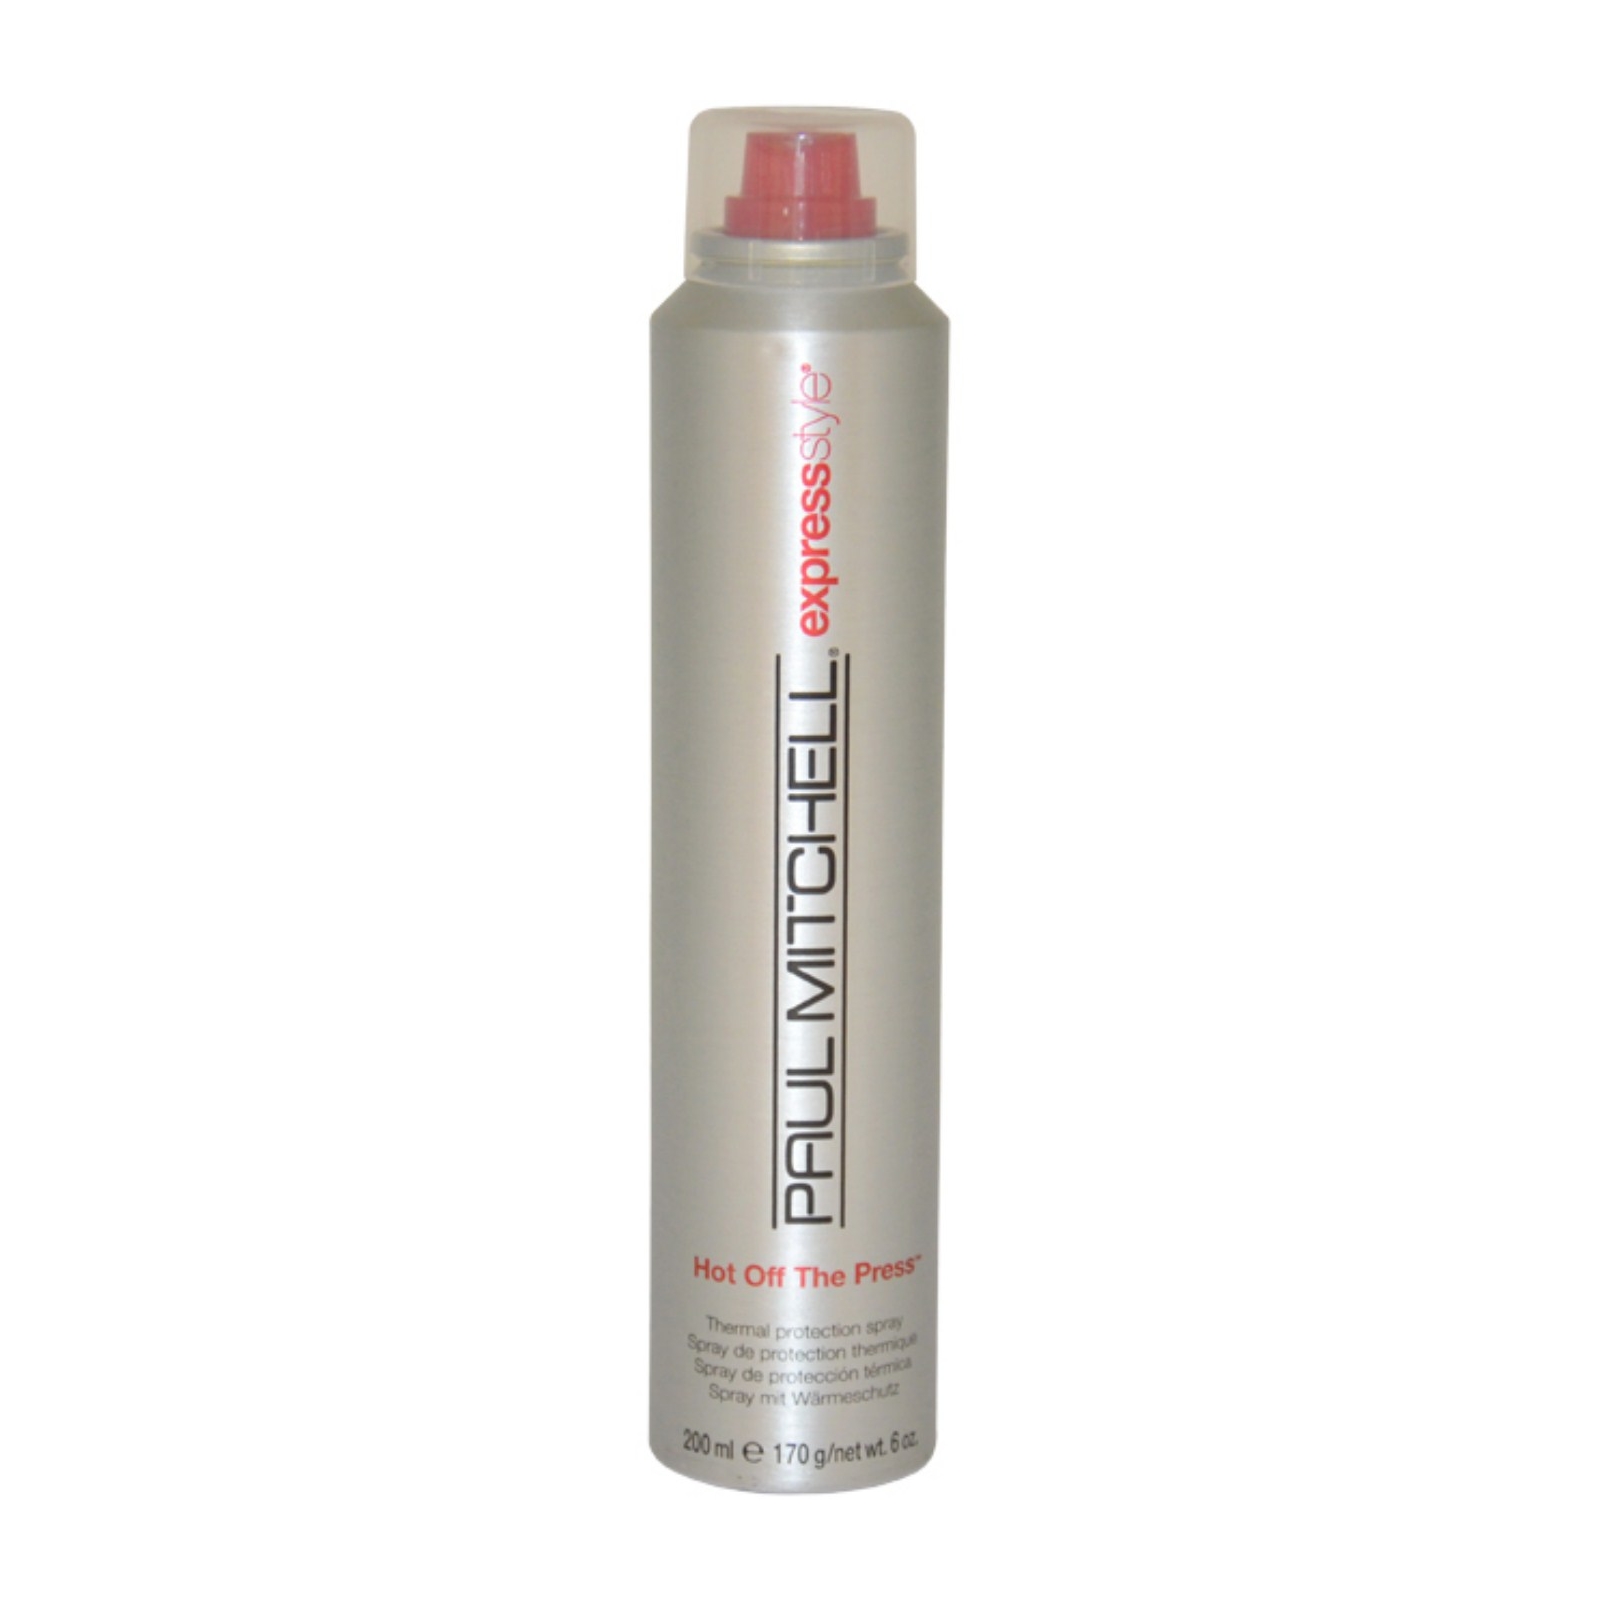 Paul Mitchell Hot Off The Press- Thermal Protection Spray by for Unisex